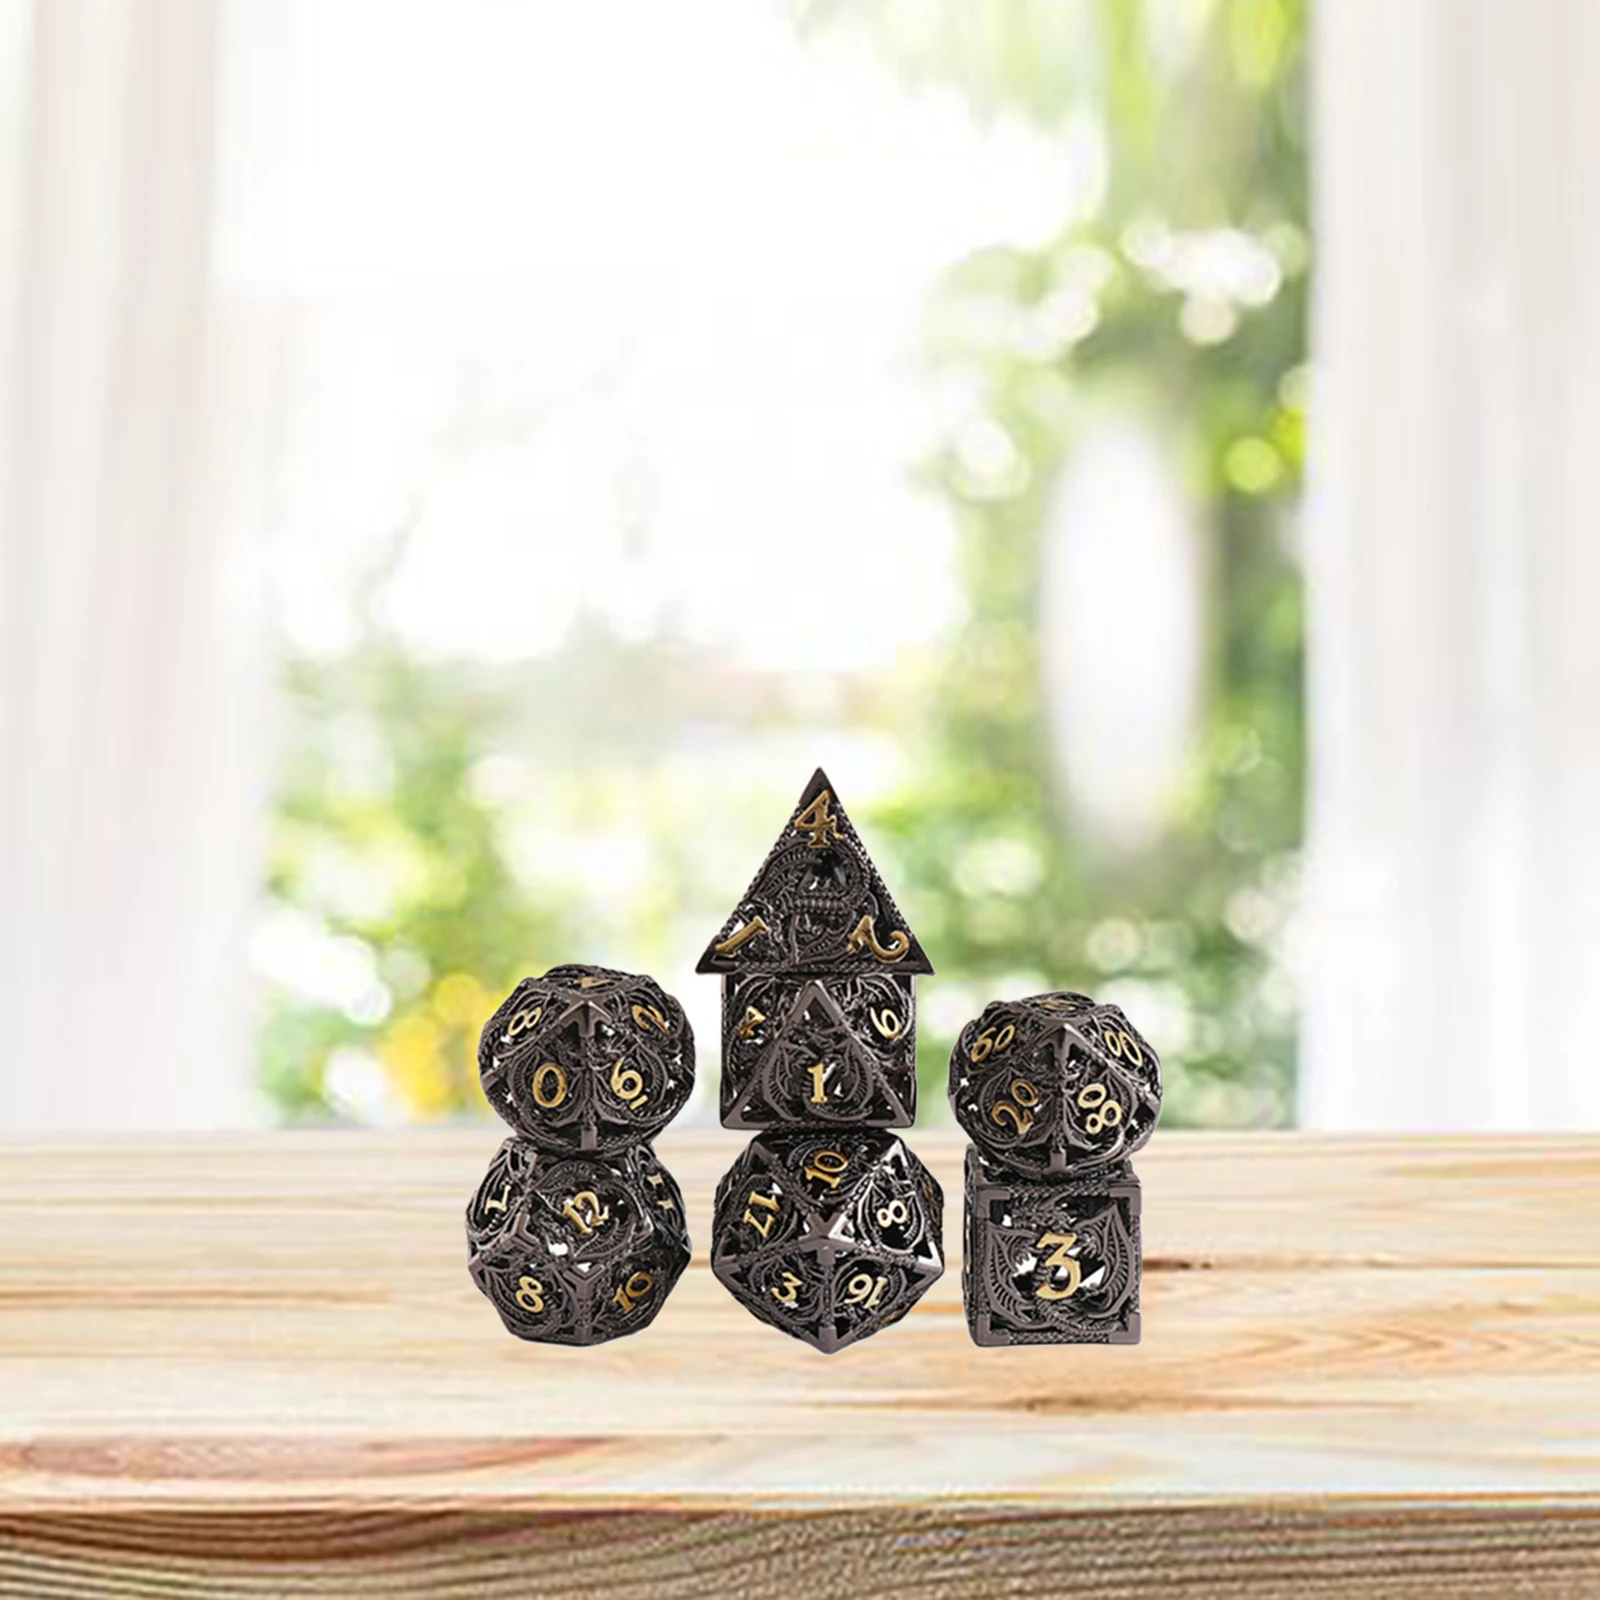 7Pcs Metal DND Dice Set Dragon Pattern Shape Hollow-carved Design with Carry Case Role Playing Game PRG Math Teaching